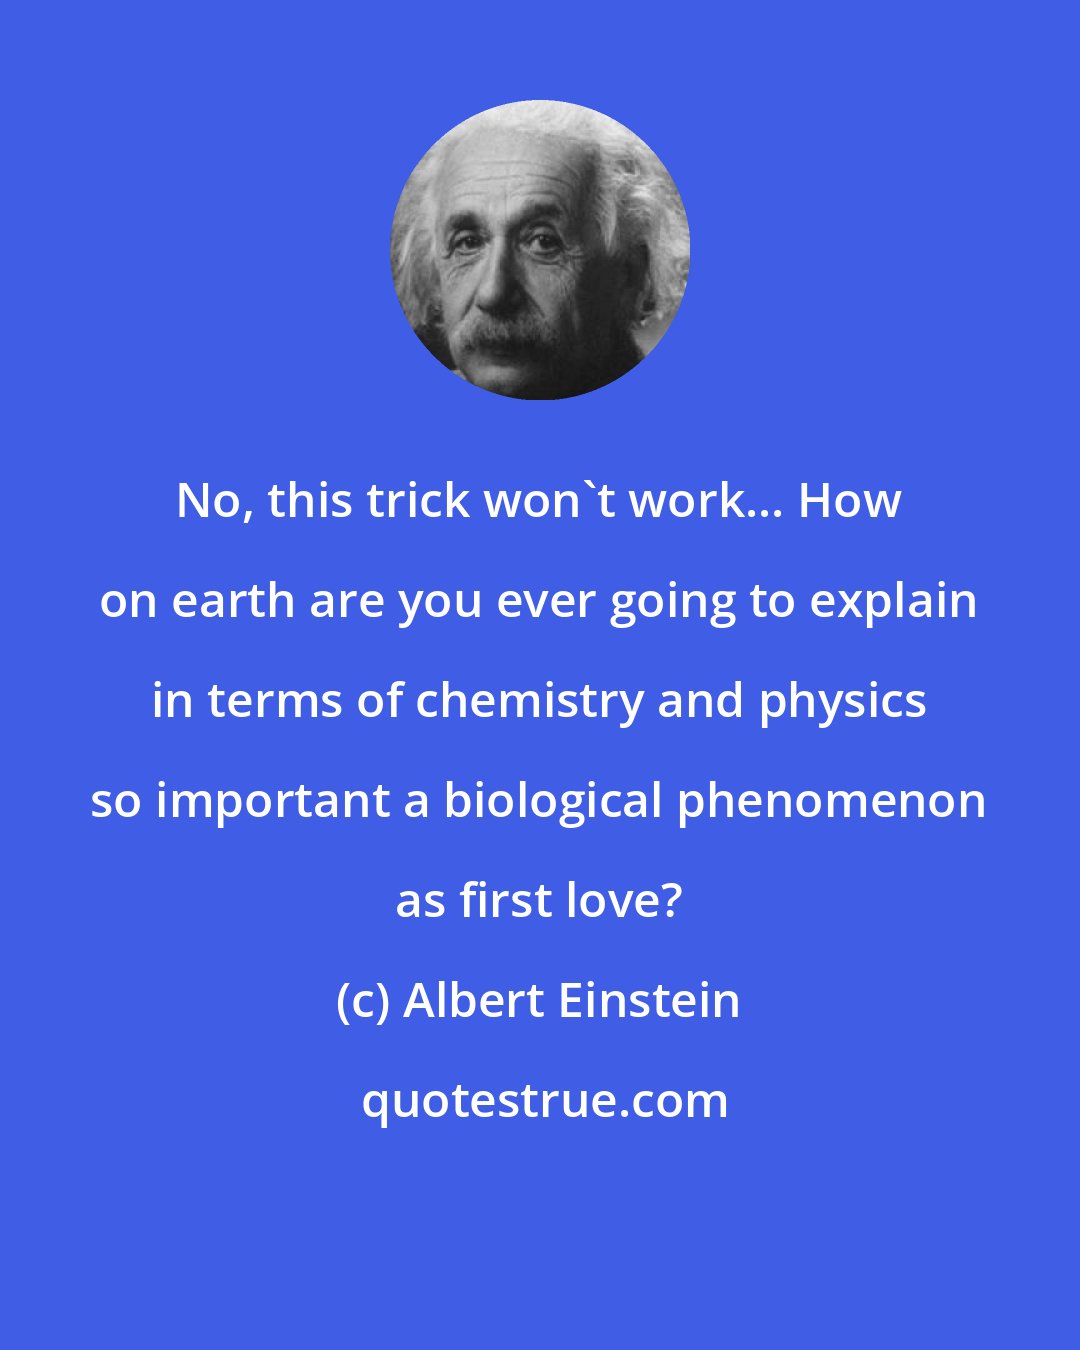 Albert Einstein: No, this trick won't work... How on earth are you ever going to explain in terms of chemistry and physics so important a biological phenomenon as first love?